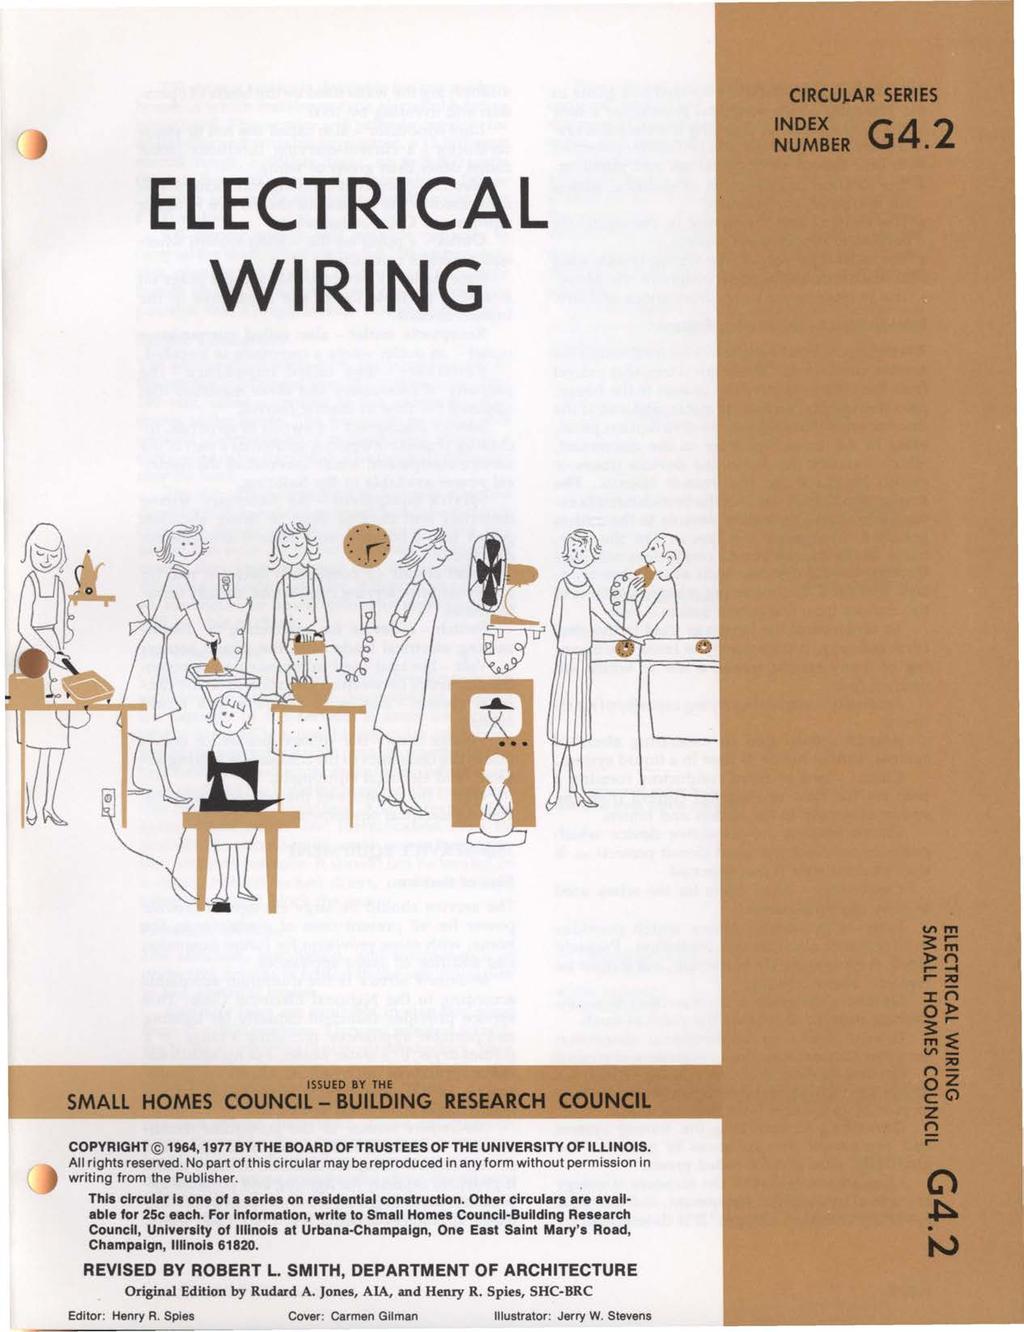 CIRCULAR SERIES INDEX G4 2 NUMBER ELECTRICAL WIRING ISSUED BY THE SMALL HOMES COUNCIL - BUILDING RESEARCH COU CIL COPYRIGHT@ 1964, 1977 BY THE BOARD OF TRUSTEES OF THE UNIVERSITY OF ILLINOIS.